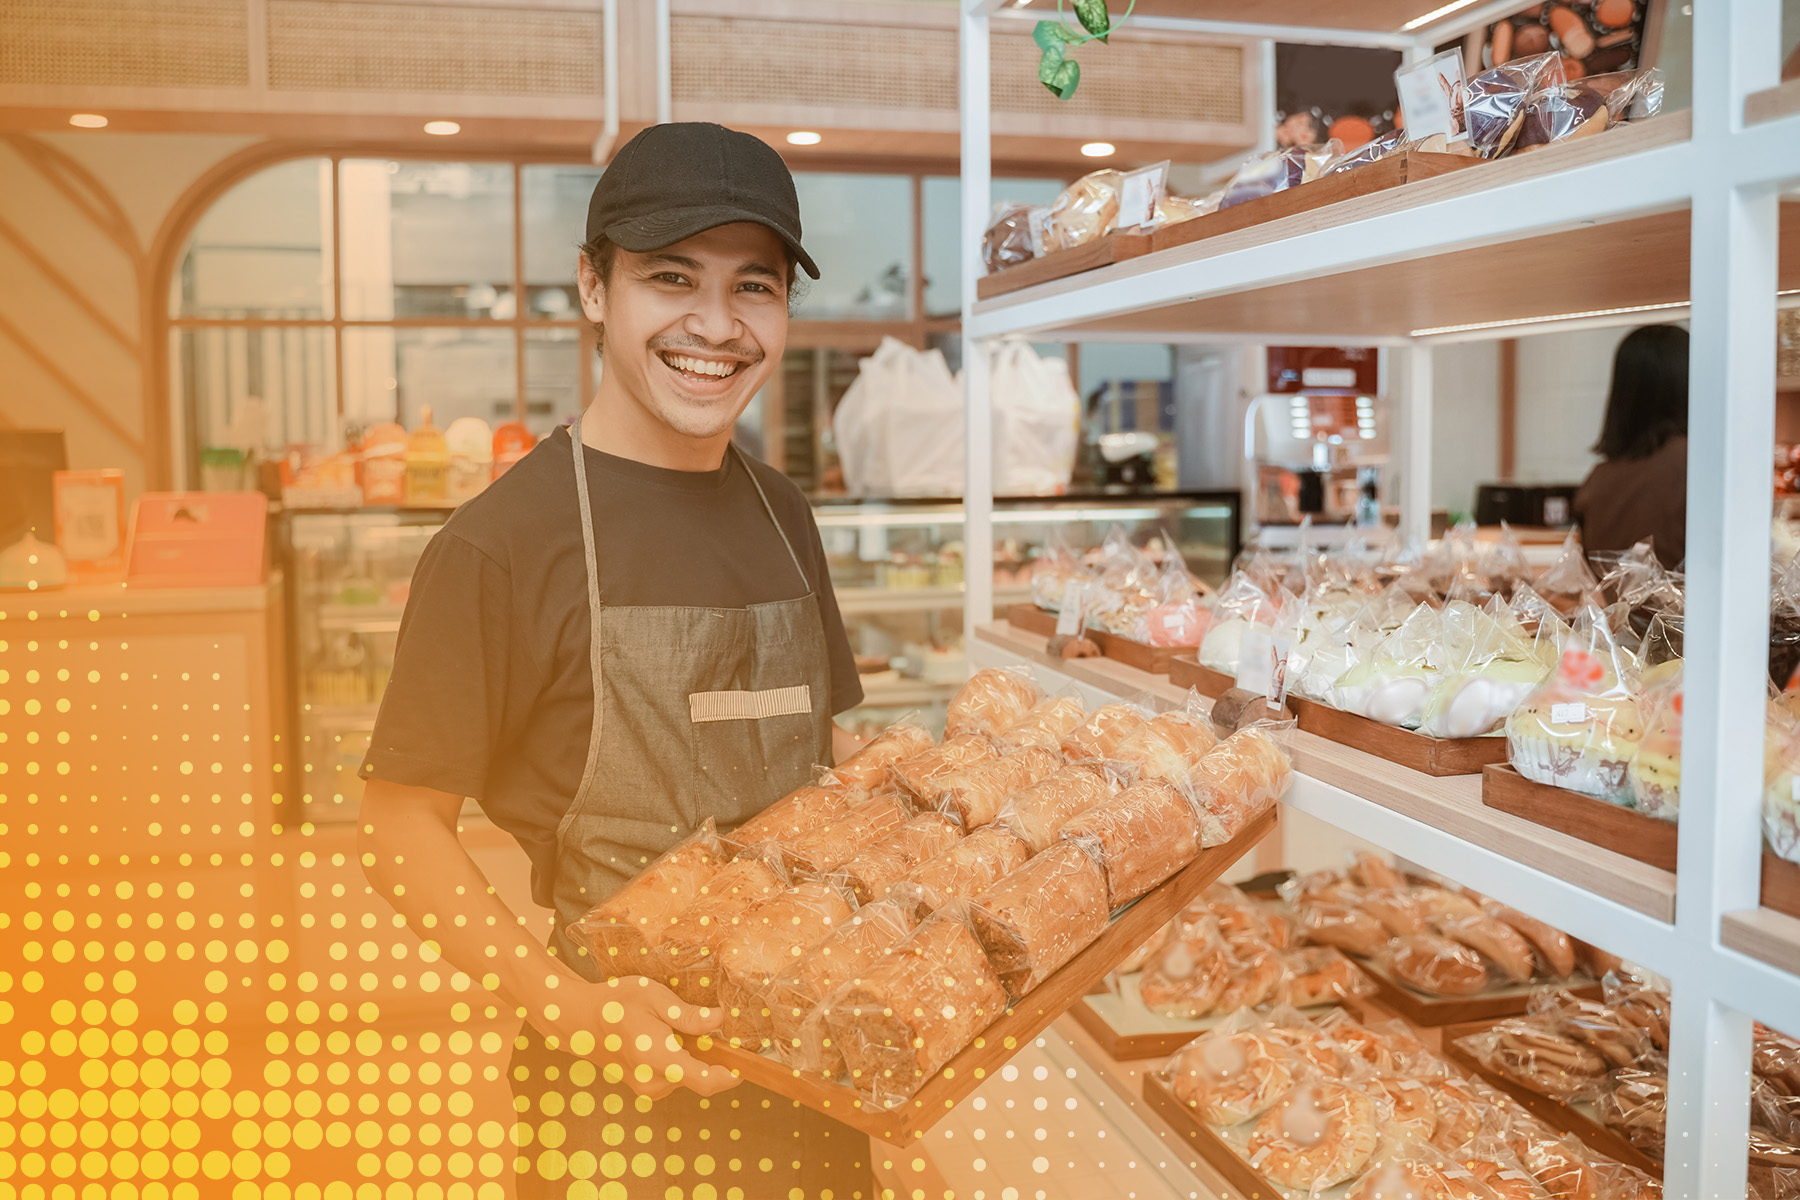 How-to-improve-bakery-items-to-boost-sales